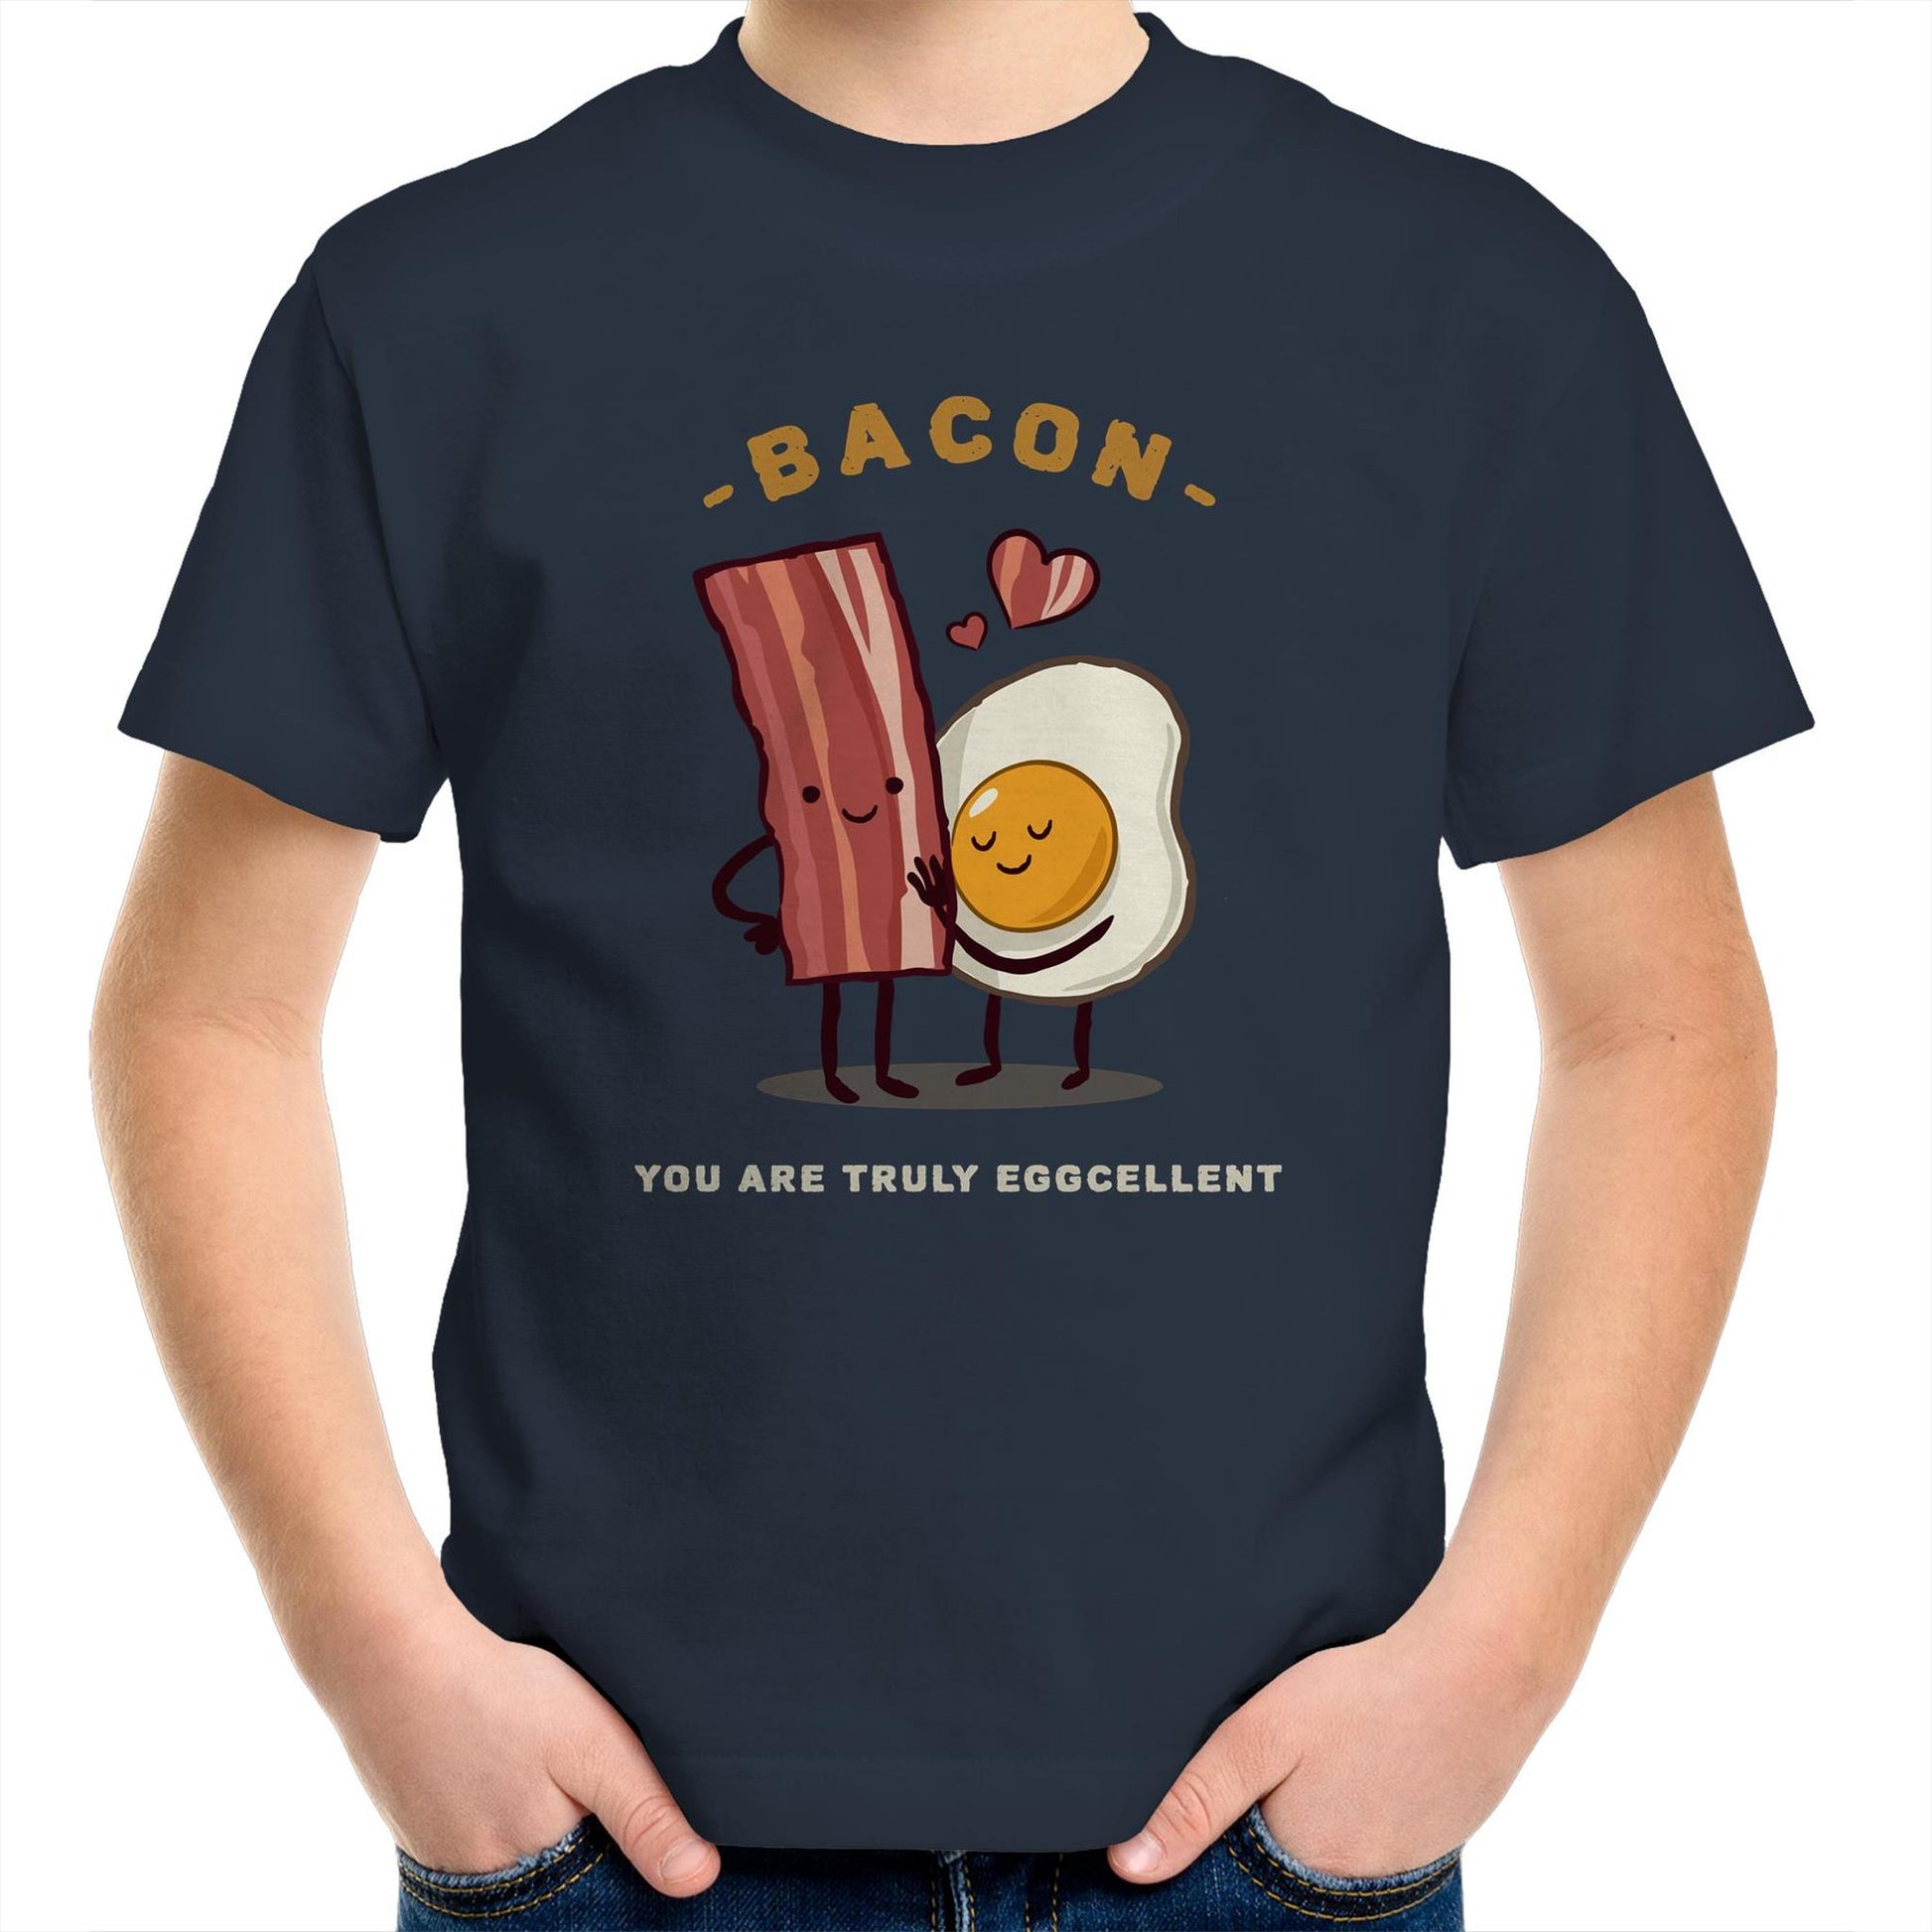 Bacon, You Are Truly Eggcellent - Kids Youth T-Shirt Navy Kids Youth T-shirt Food